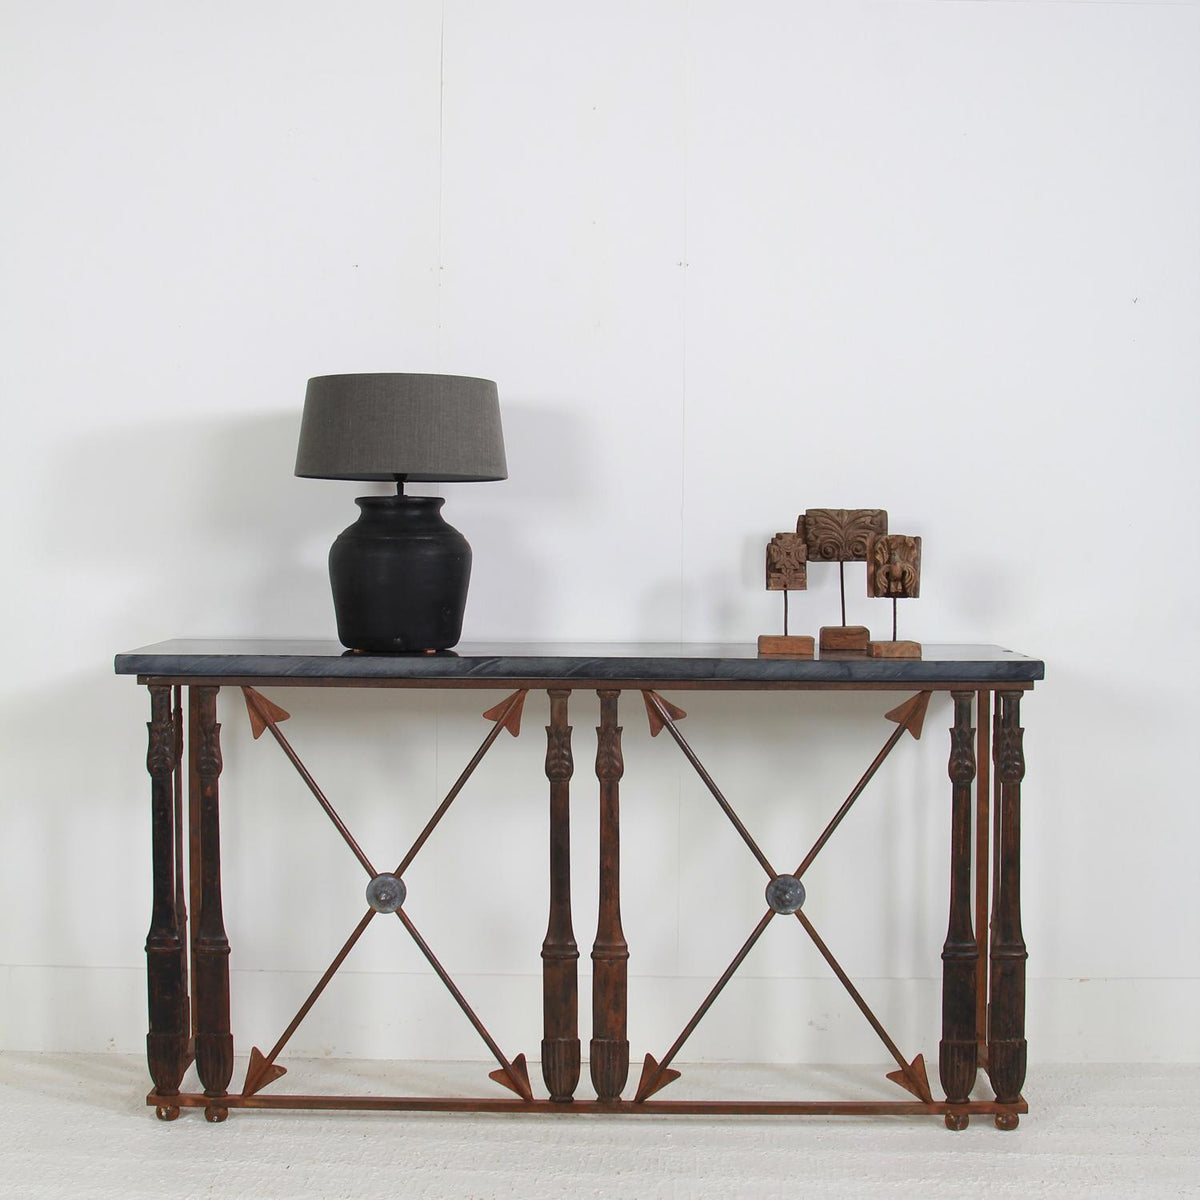 HUGE FRENCH 19TH CENTURY IRON & STONE CONSOLE TABLE